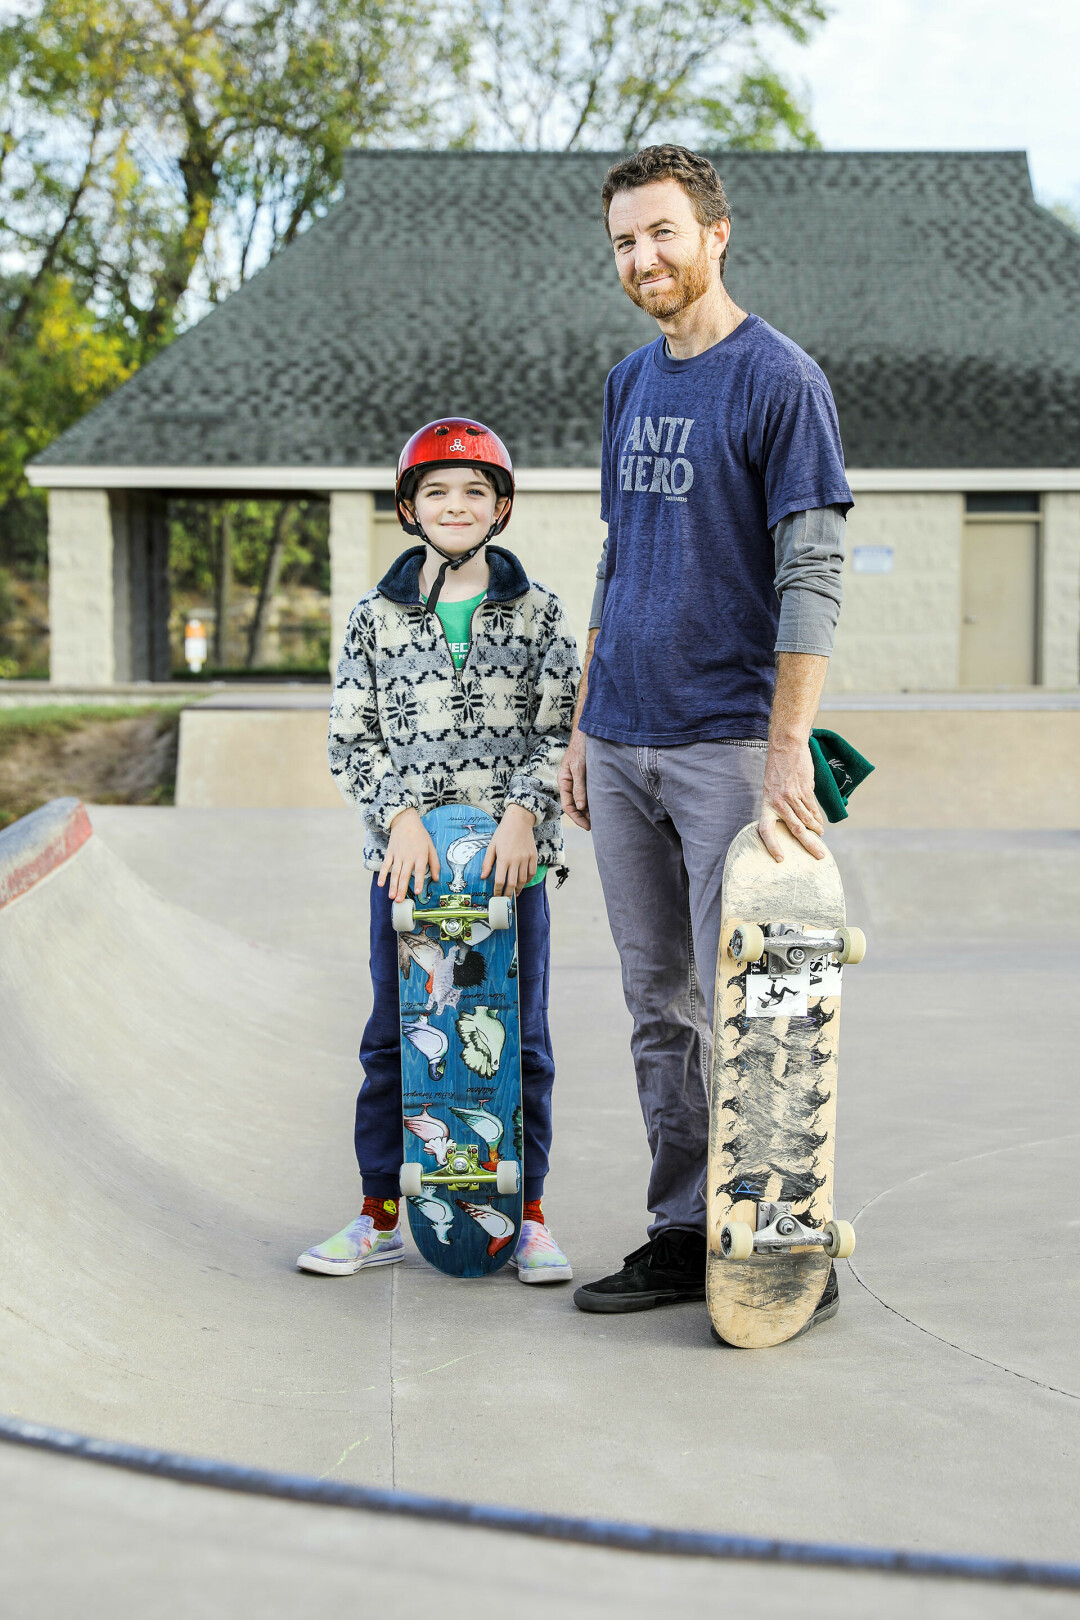 Gabe Brummett and his son, Burley, who both enjoy using Eau Claire’s skate park in their spare time. (Photo by Andrea Paulseth)